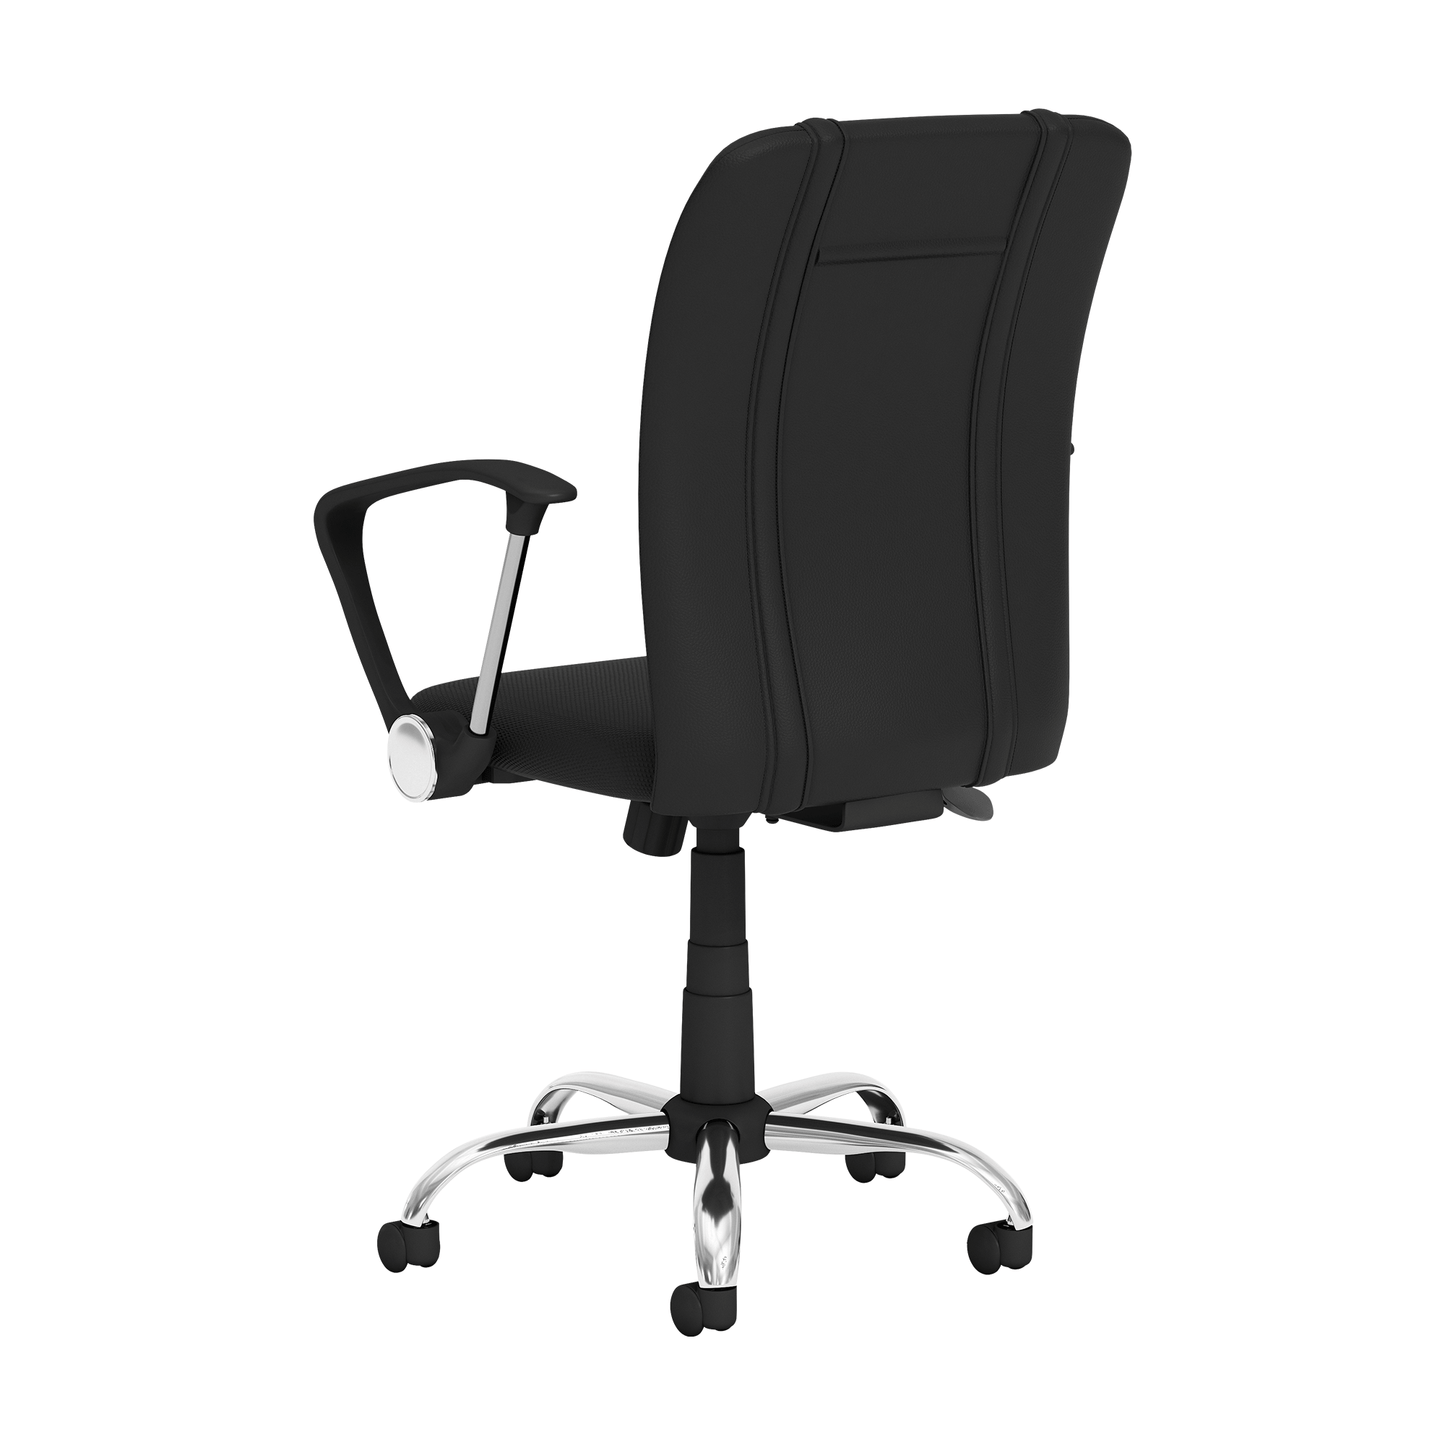 Curve Task Chair with Georgetown Hoyas Secondary